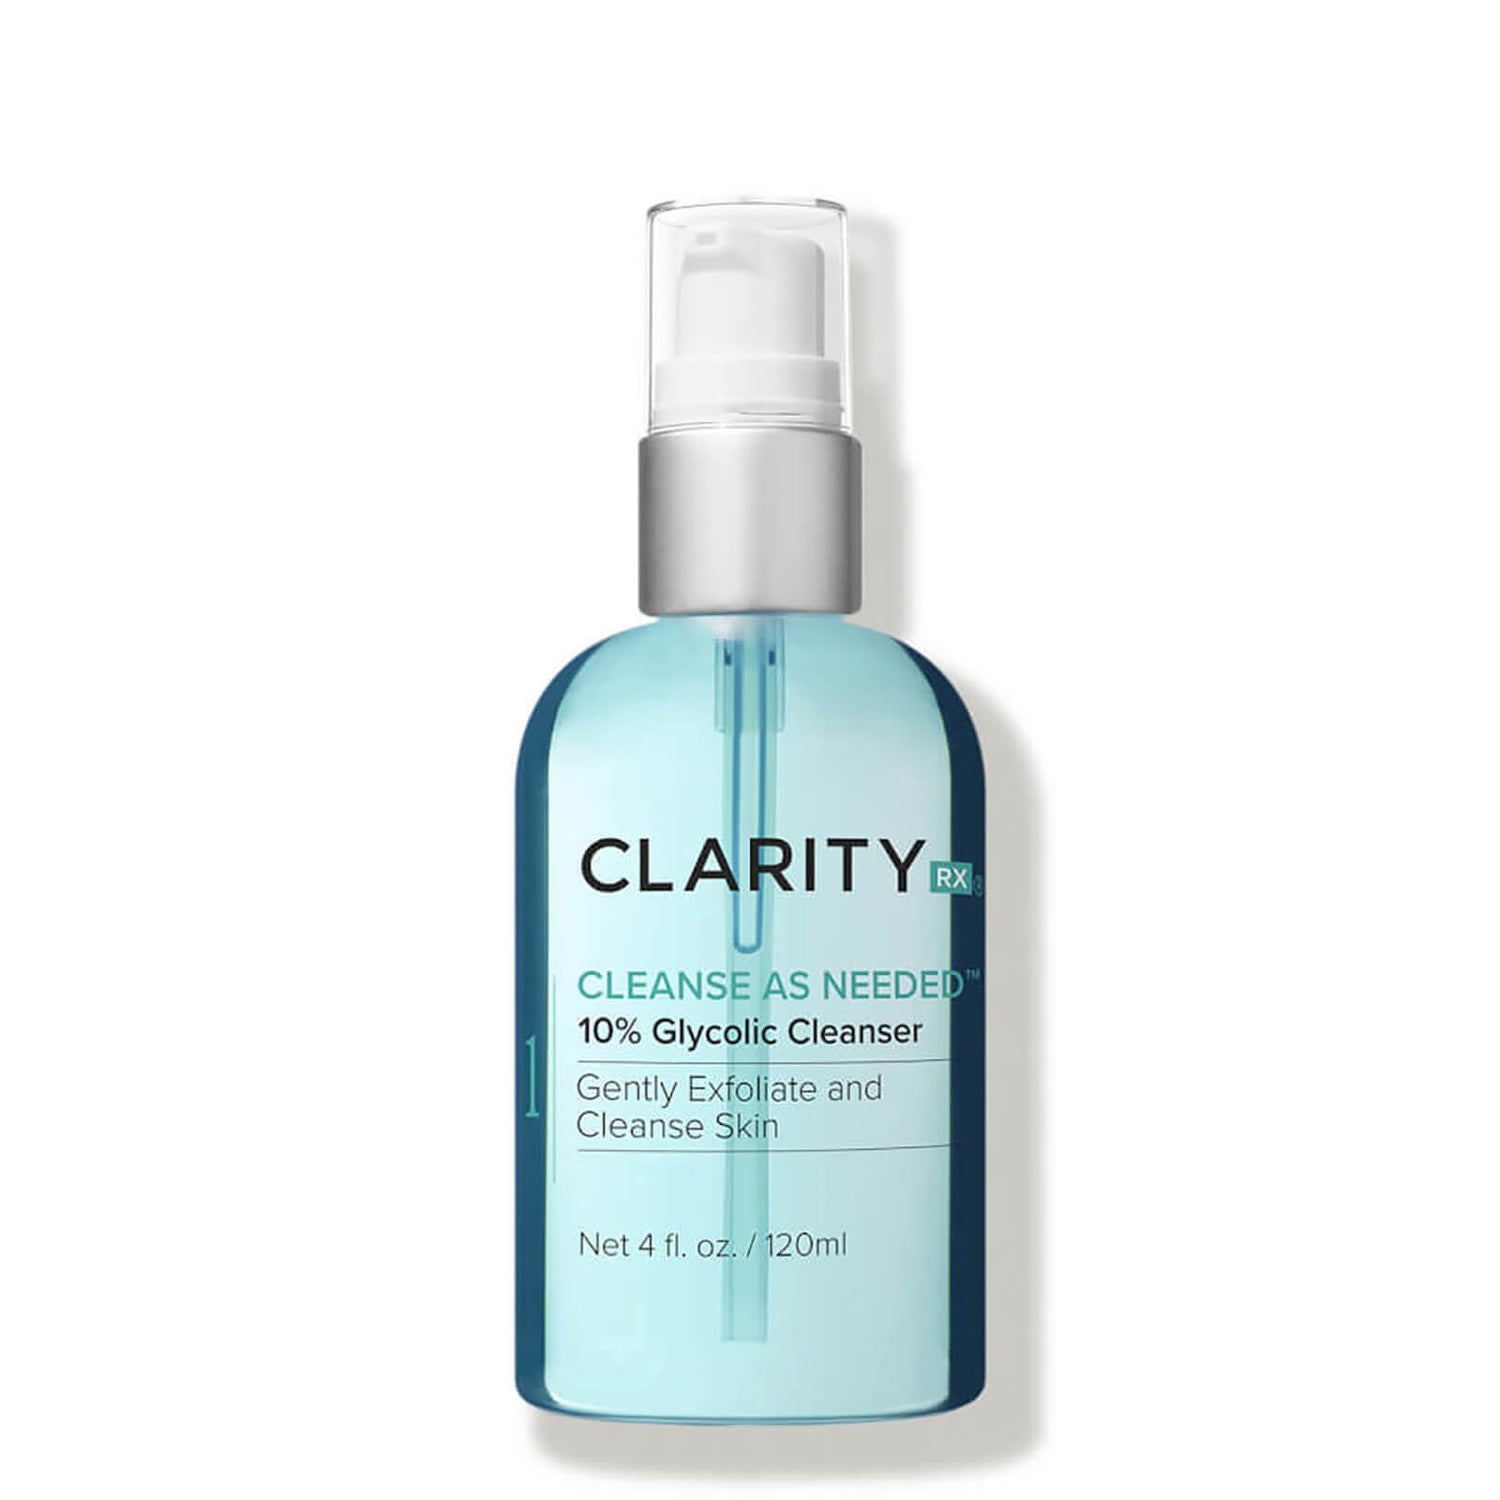 ClarityRx Cleanse As Needed 10 Percent Glycolic Cleanser (4 fl. oz.)